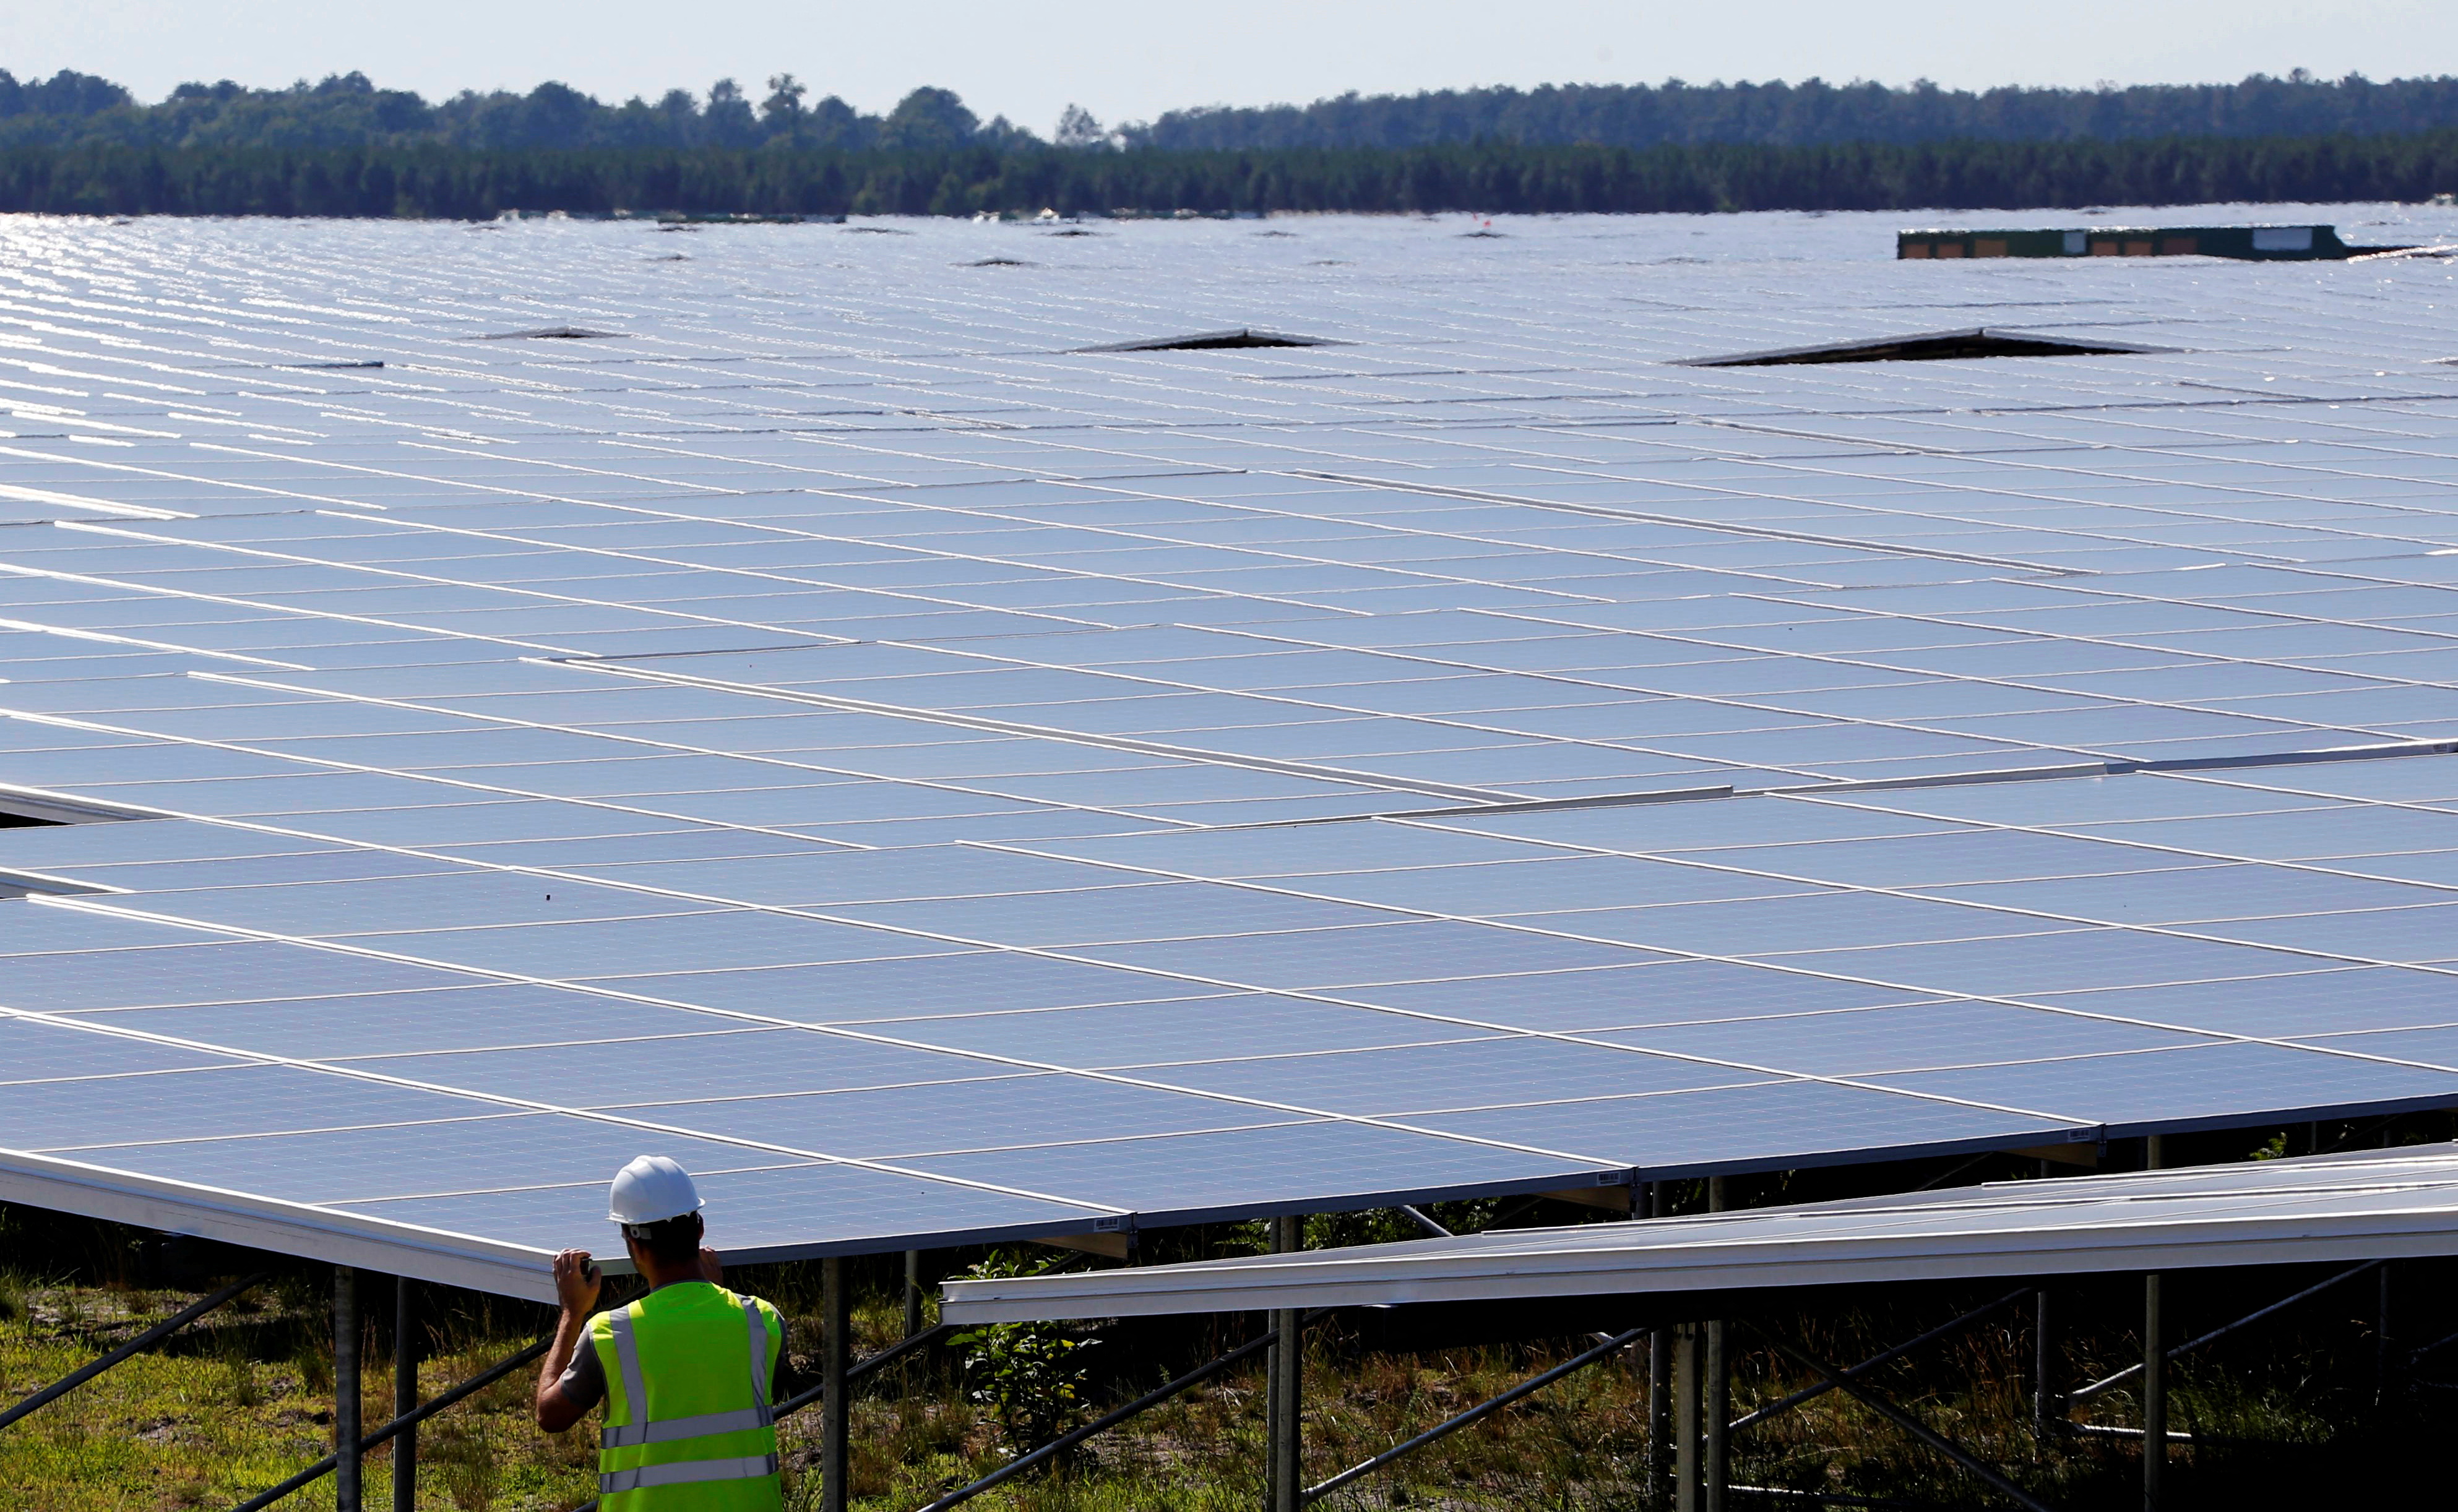 A general view shows solar panels used to produce renewable energy at the photovoltaic park in Cestas